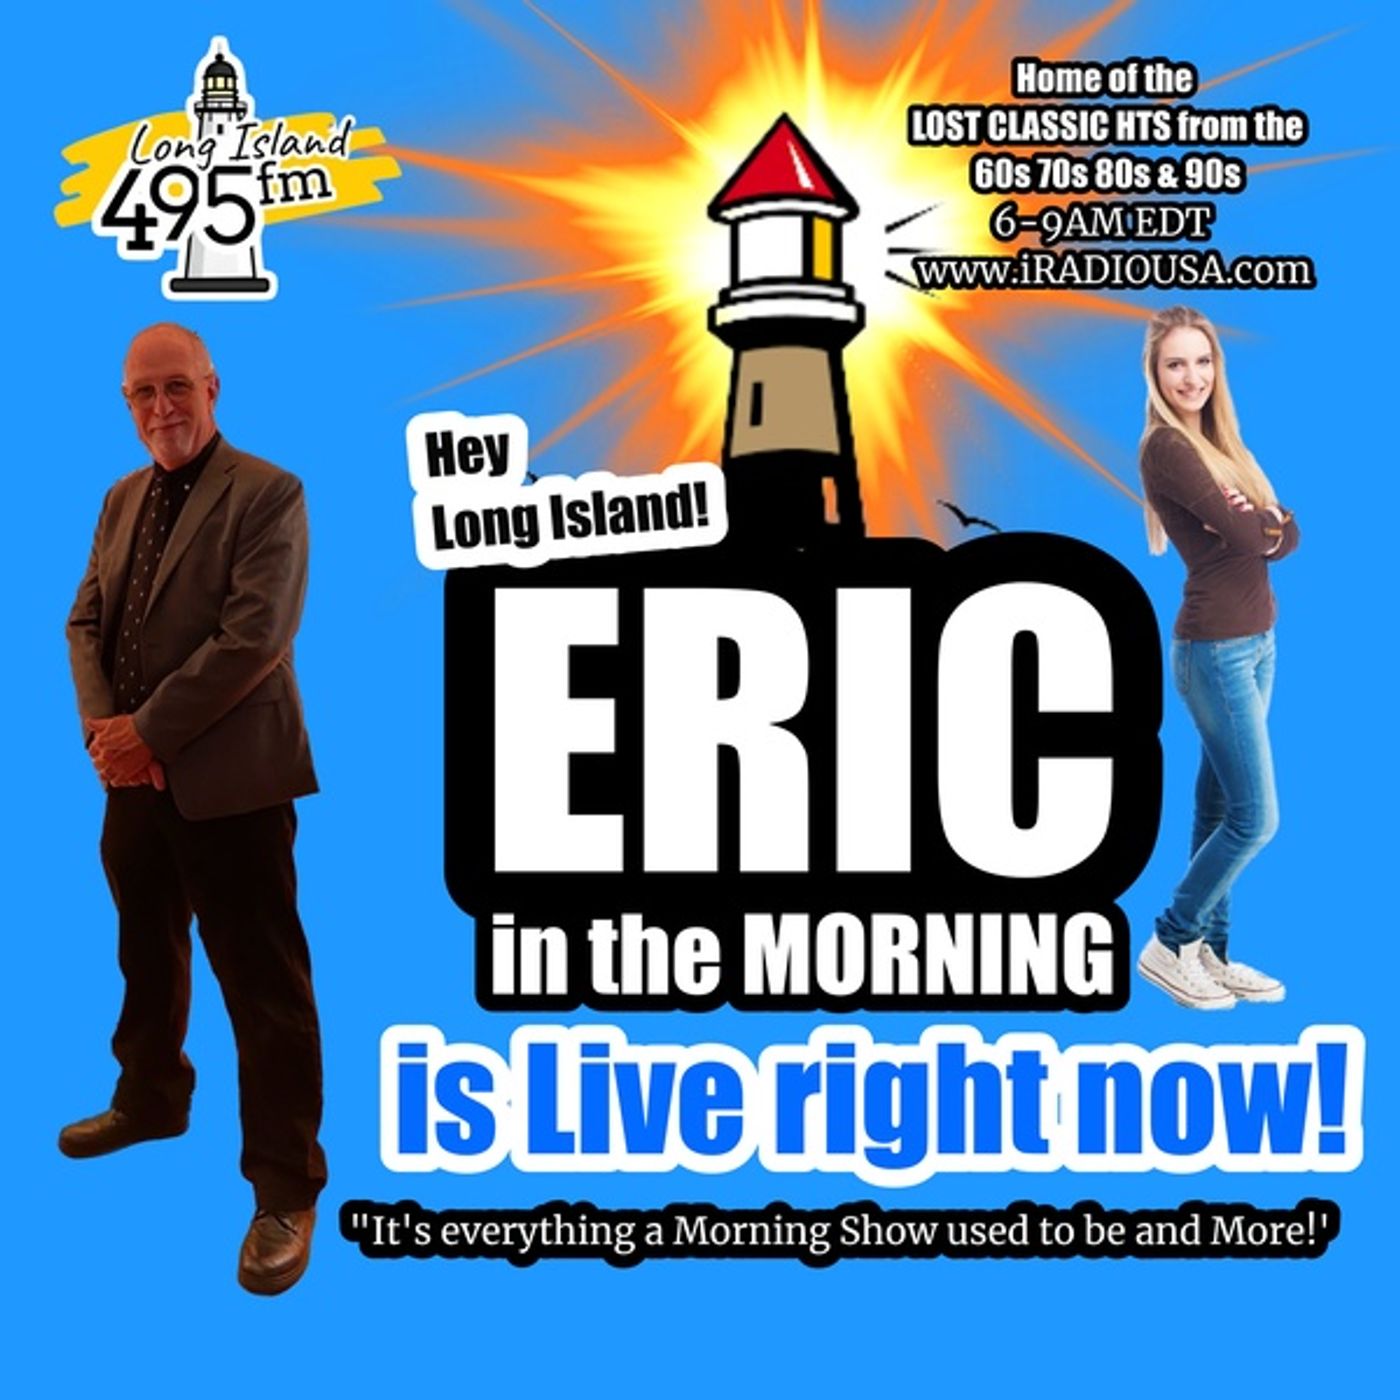 GARY LOCAL BRUSH INTERVIEW on ERIC in the MORNING